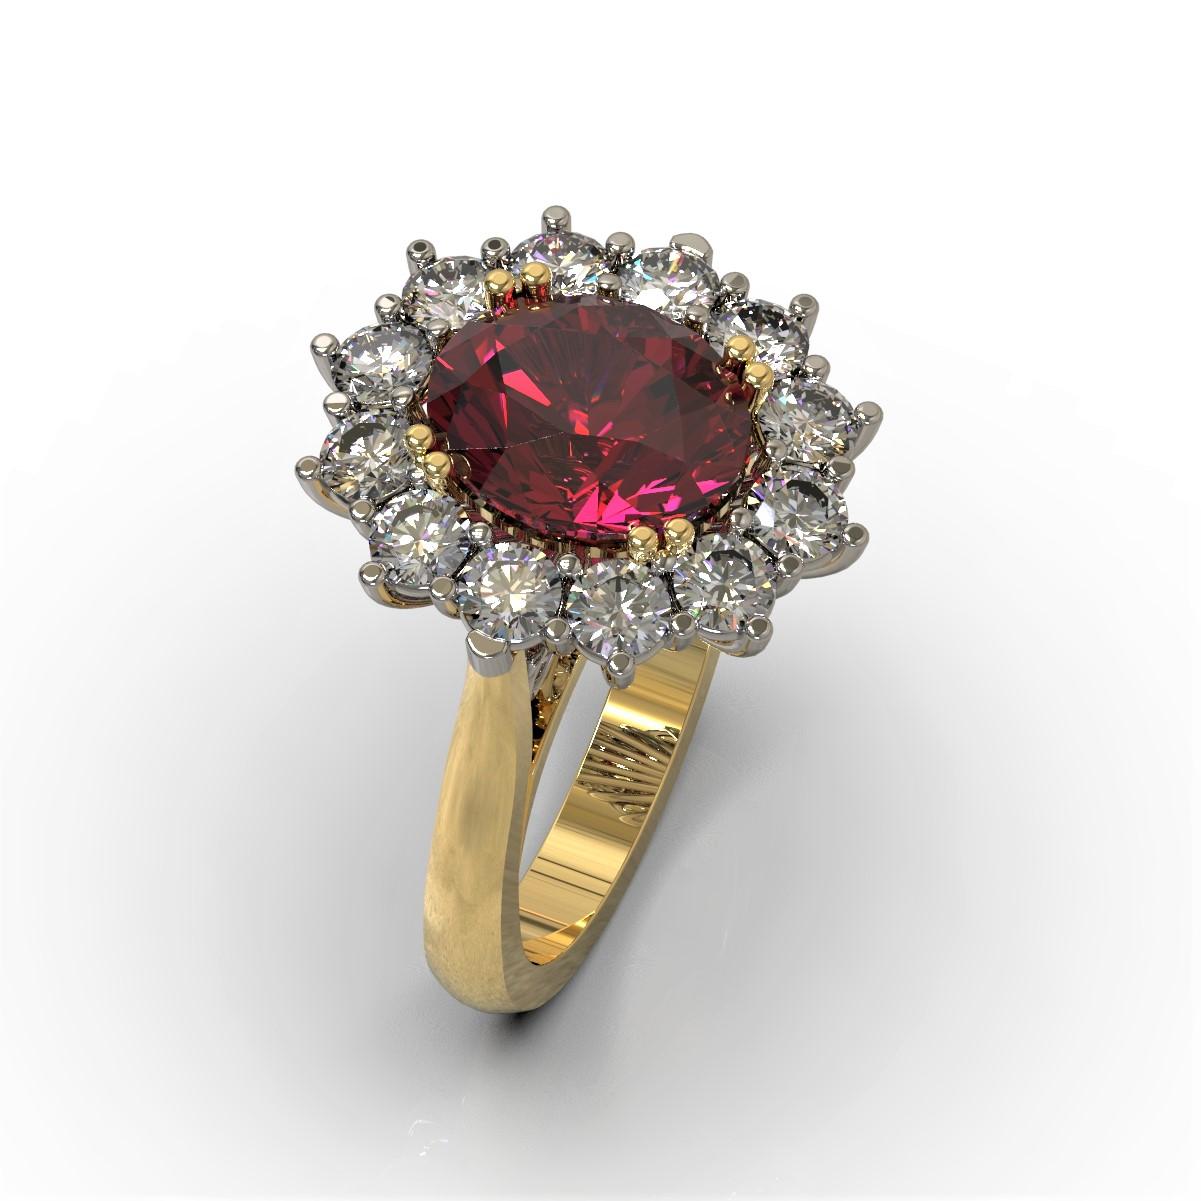 4.32 Carat Oval Rhodolite and Diamonds Cocktail Ring in Platinum & 18 Carat Gold In New Condition For Sale In South Perth, AU